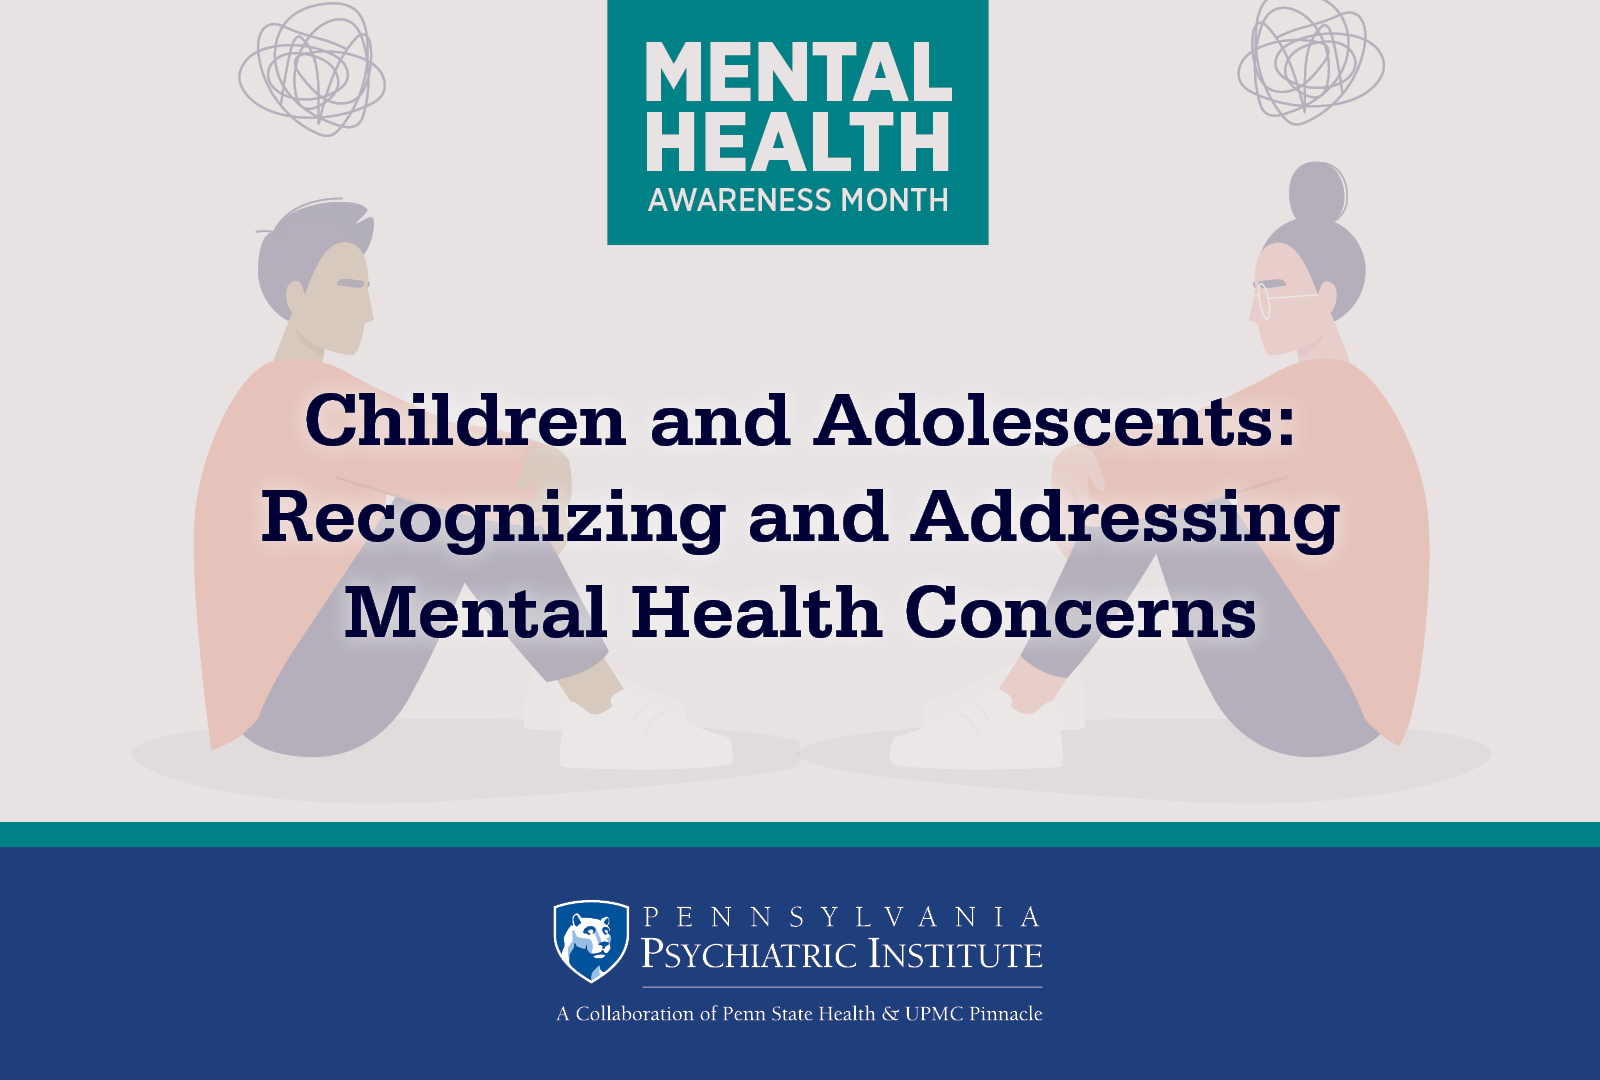 Children and Adolescents: Recognizing and Addressing Mental Health Concerns